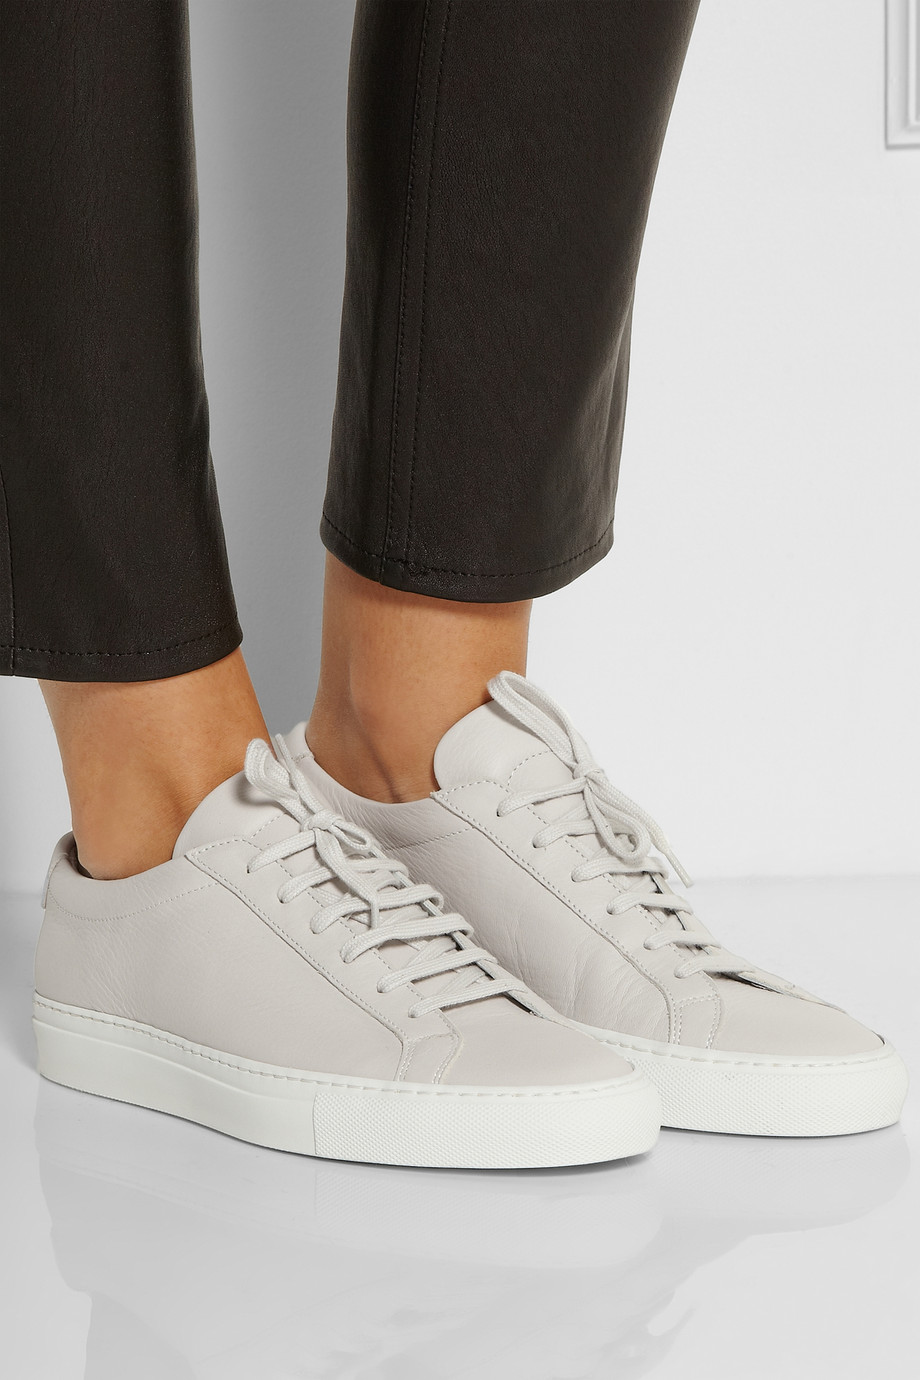 Lyst - Common Projects Achilles Leather Sneakers in White